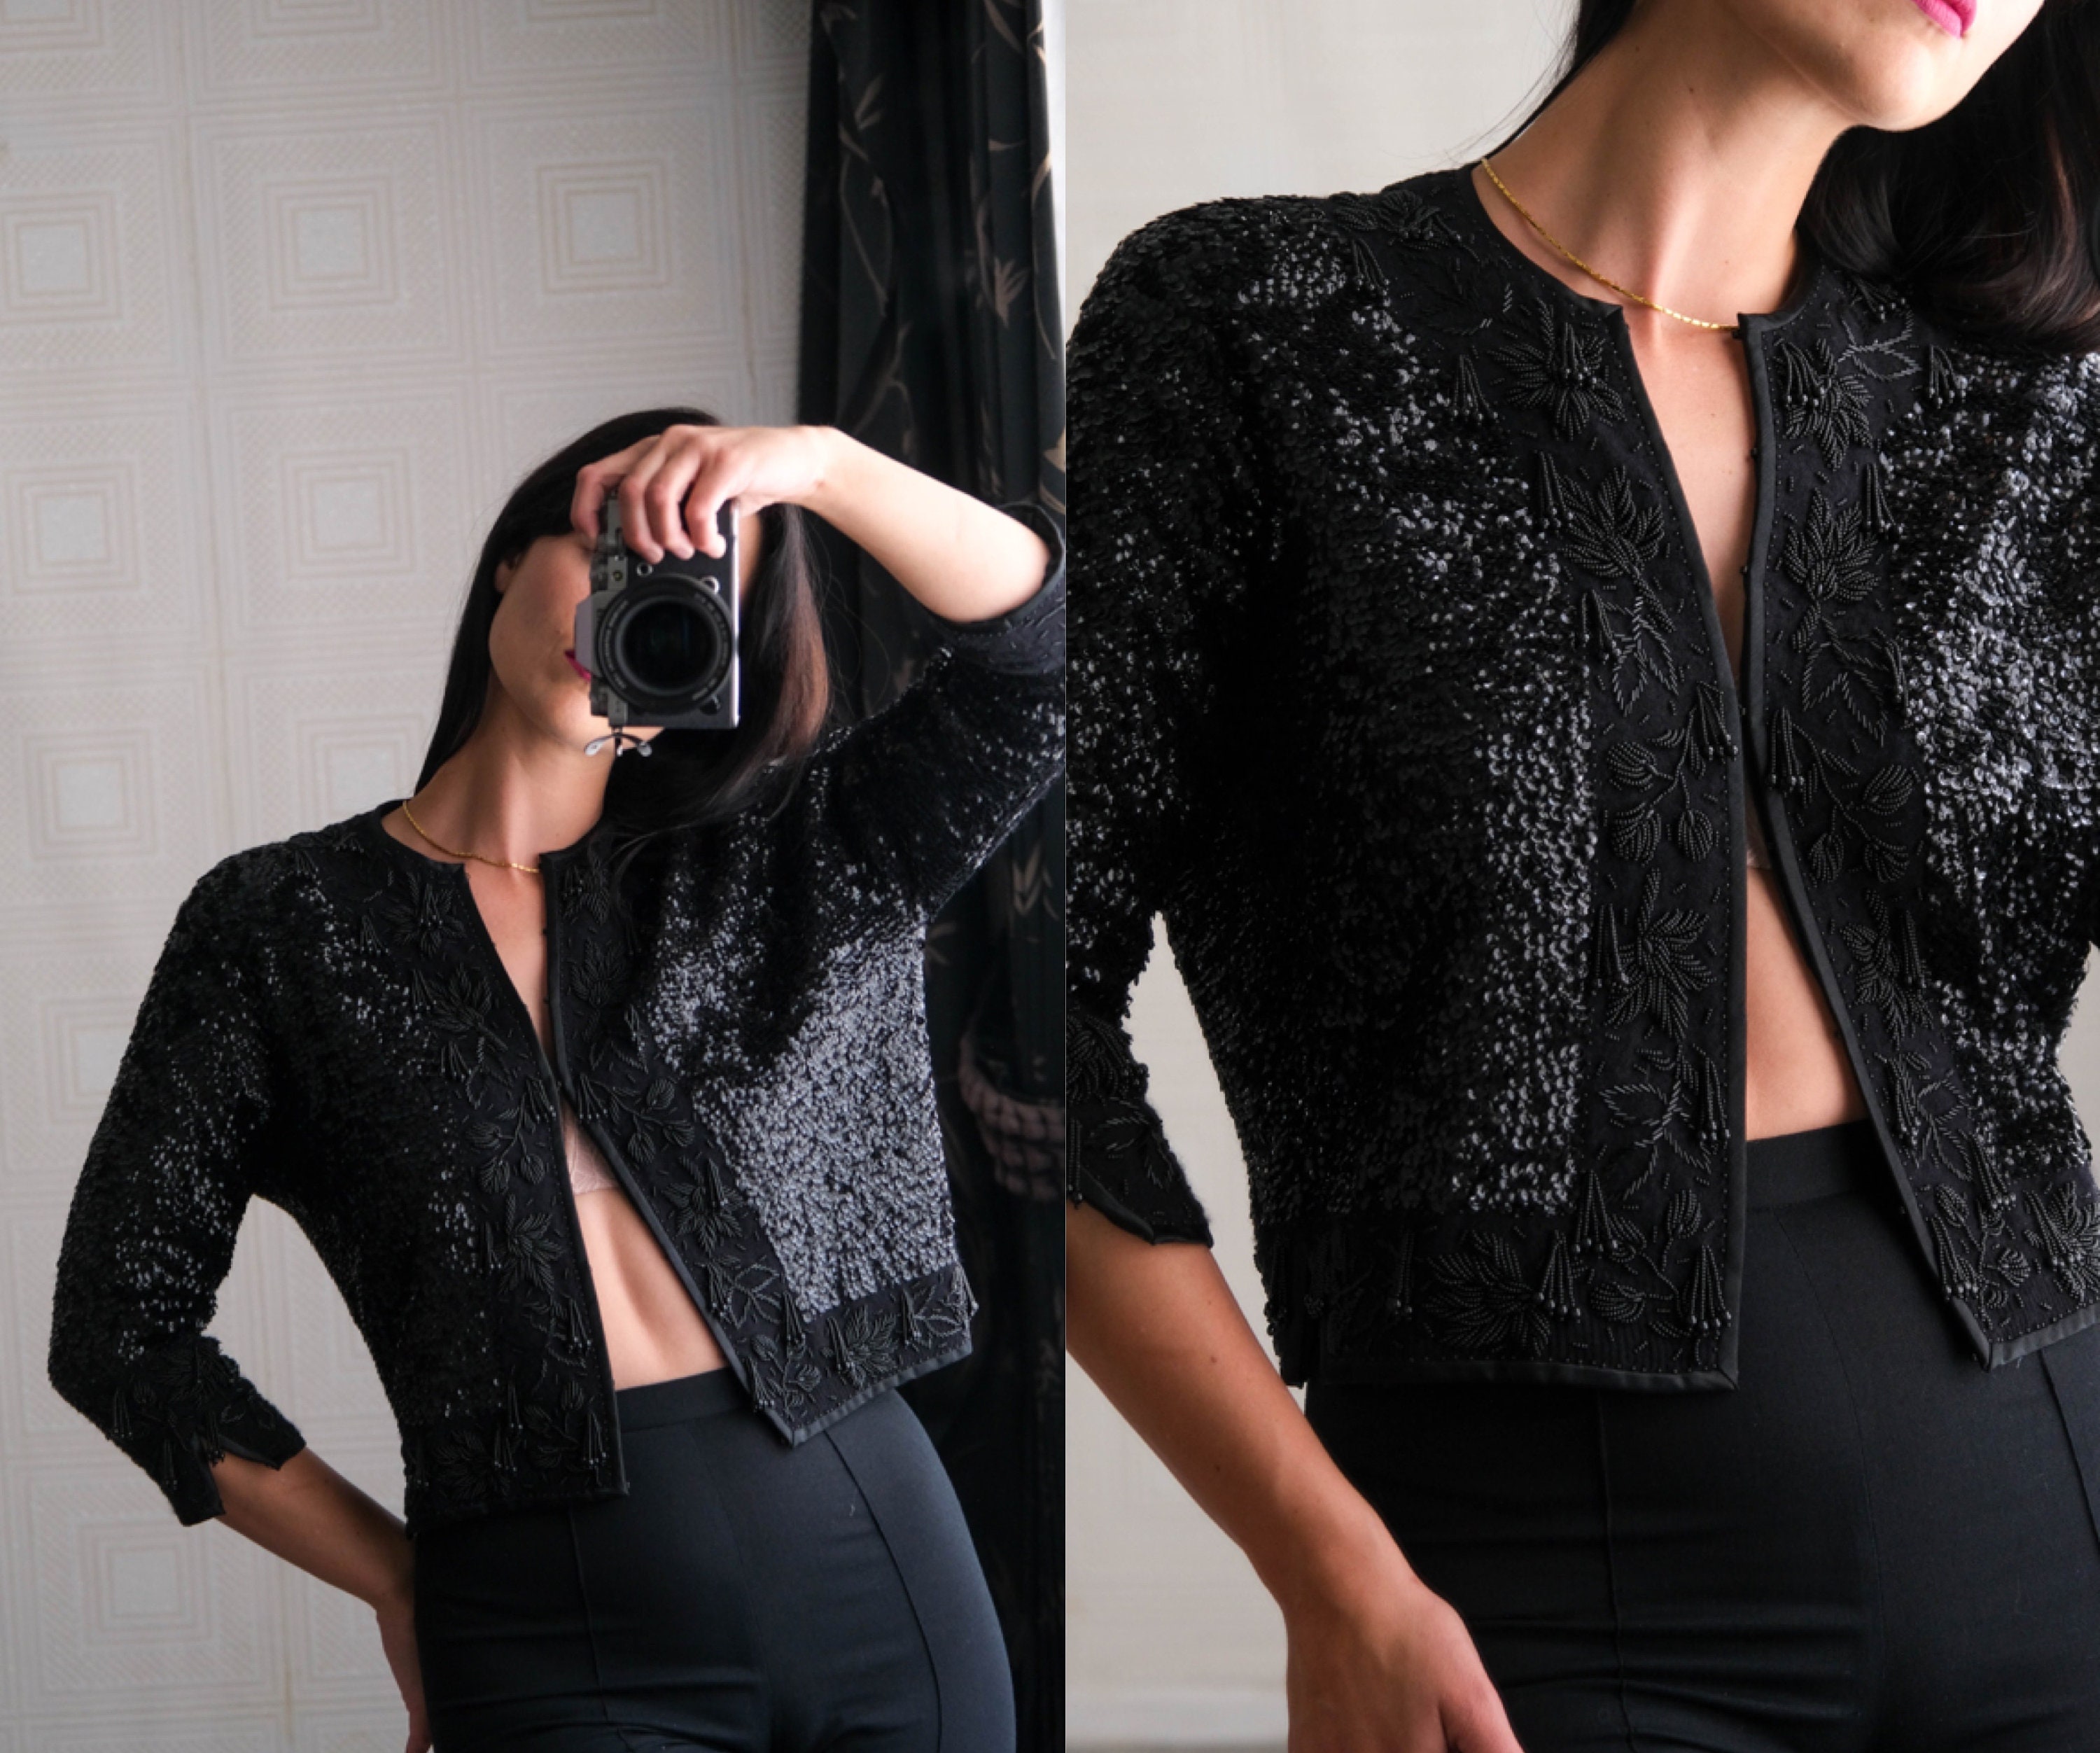 Past auction: Louis Feraud cropped beaded jacket 1980s-90s